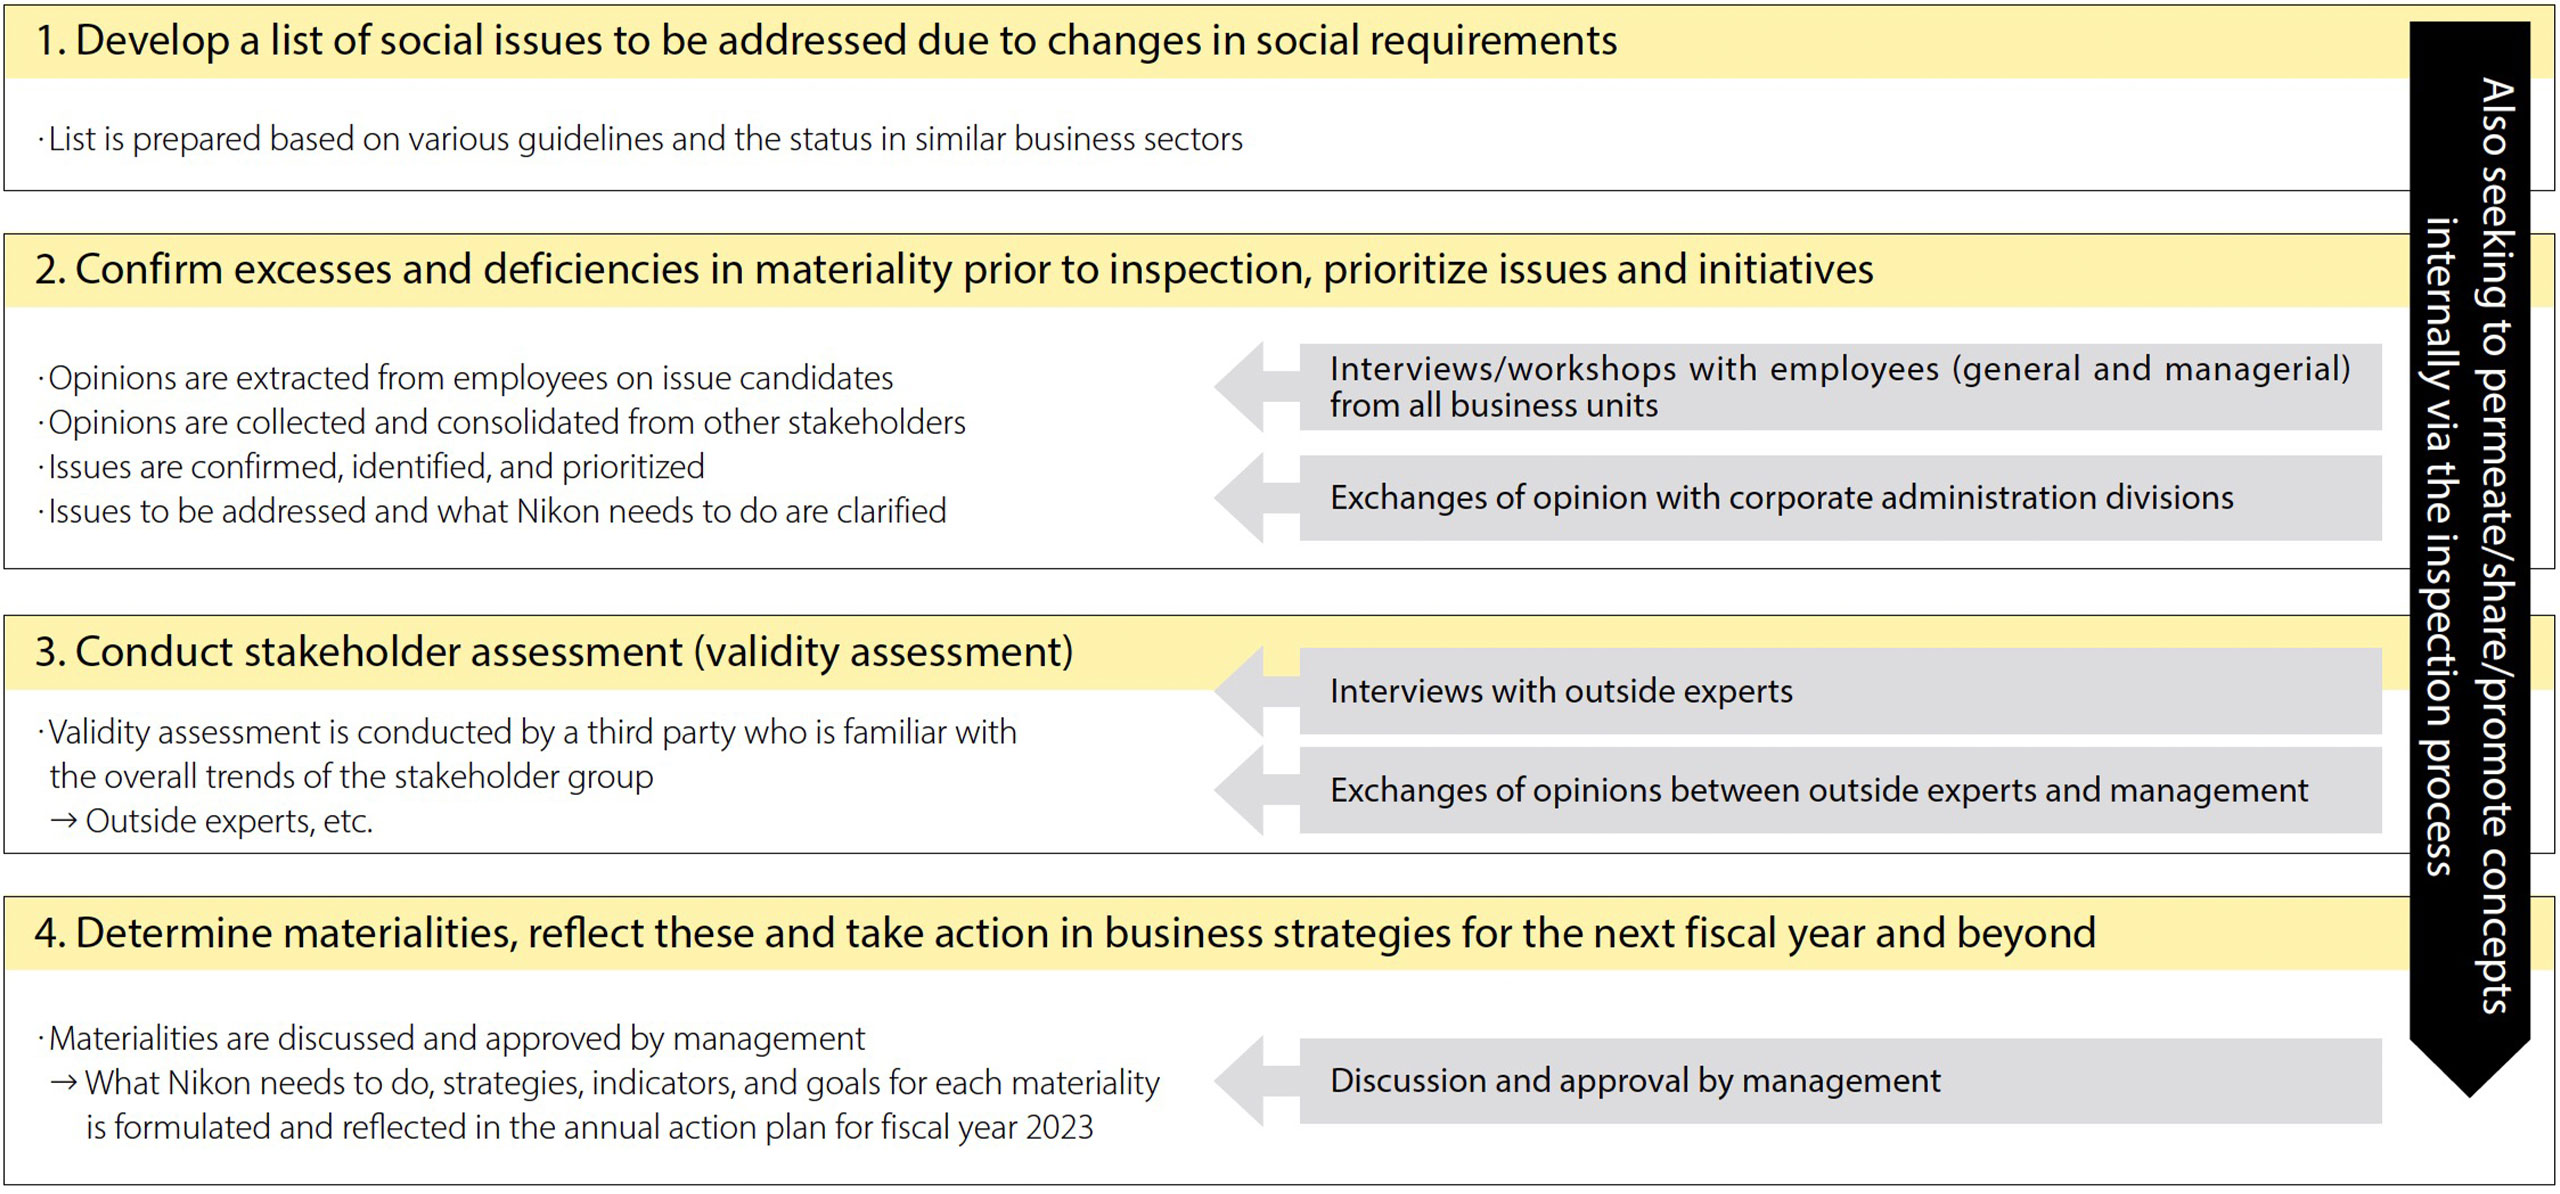 1. Develop a list of social issues to be addressed due to changes in social requirements: ・List is prepared based on various guidelines and the status in similar business sectors / 2. Confirm excesses and deficiencies in materiality prior to inspection, prioritize issues and initiatives: ・Opinions are extracted from employees on issue candidates ・Opinions are collected and consolidated from other stakeholders ・Issues are confirmed, identified, and prioritized ・Issues to be addressed and what Nikon needs to do are clarified ←Interviews/workshops with employees (general and managerial) from all business units ←Exchanges of opinion with corporate administration divisions / 3. Conduct stakeholder assessment (validity assessment): ・Validity assessment is conducted by a third party who is familiar with the overall trends of the stakeholder group → Outside experts, etc. ←Interviews with outside experts ←Exchanges of opinions between outside experts and management / 4. Determine materialities, reflect these and take action in business strategies for the next fiscal year and beyond: ・Materialities are discussed and approved by management → What Nikon needs to do, strategies, indicators, and goals for each materiality  is formulated and reflected in the annual action plan for fiscal year 2023 ←Discussion and approval by management / Also seeking to permeate/share/promote concepts internally via the inspection process